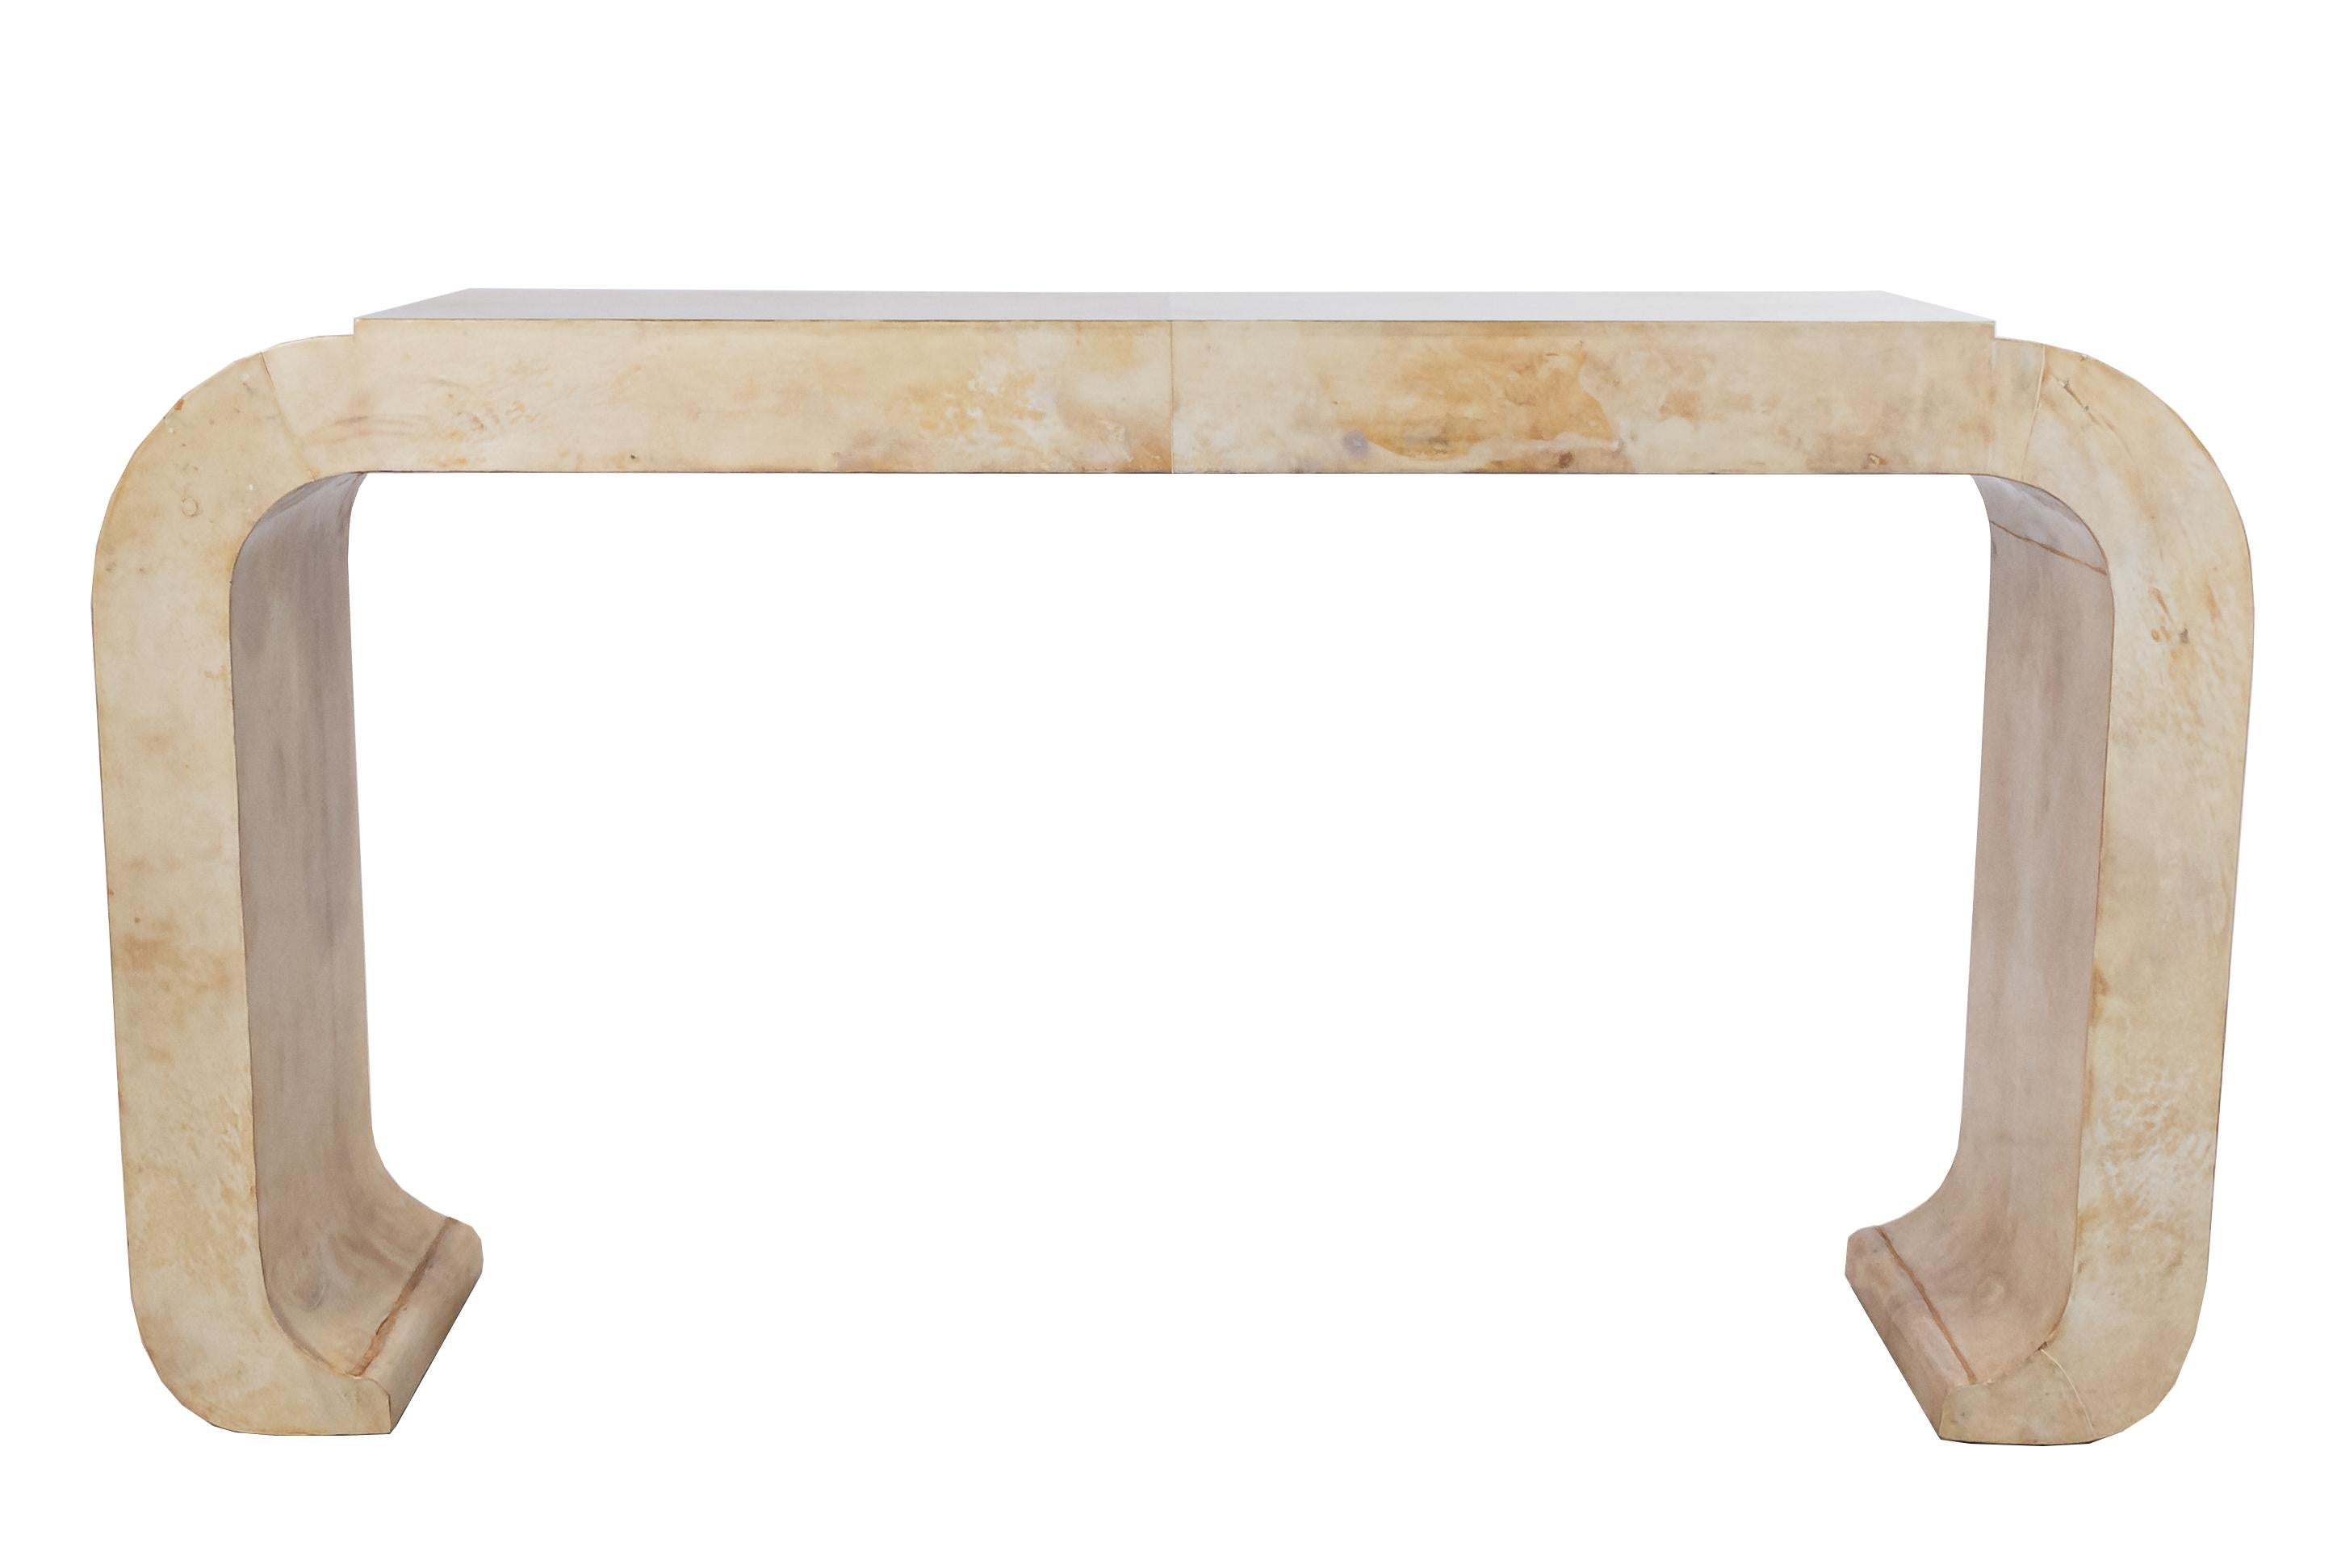 Midcentury Italian (circa 1970) parchment veneer console table with rounded edges and a raised center section.